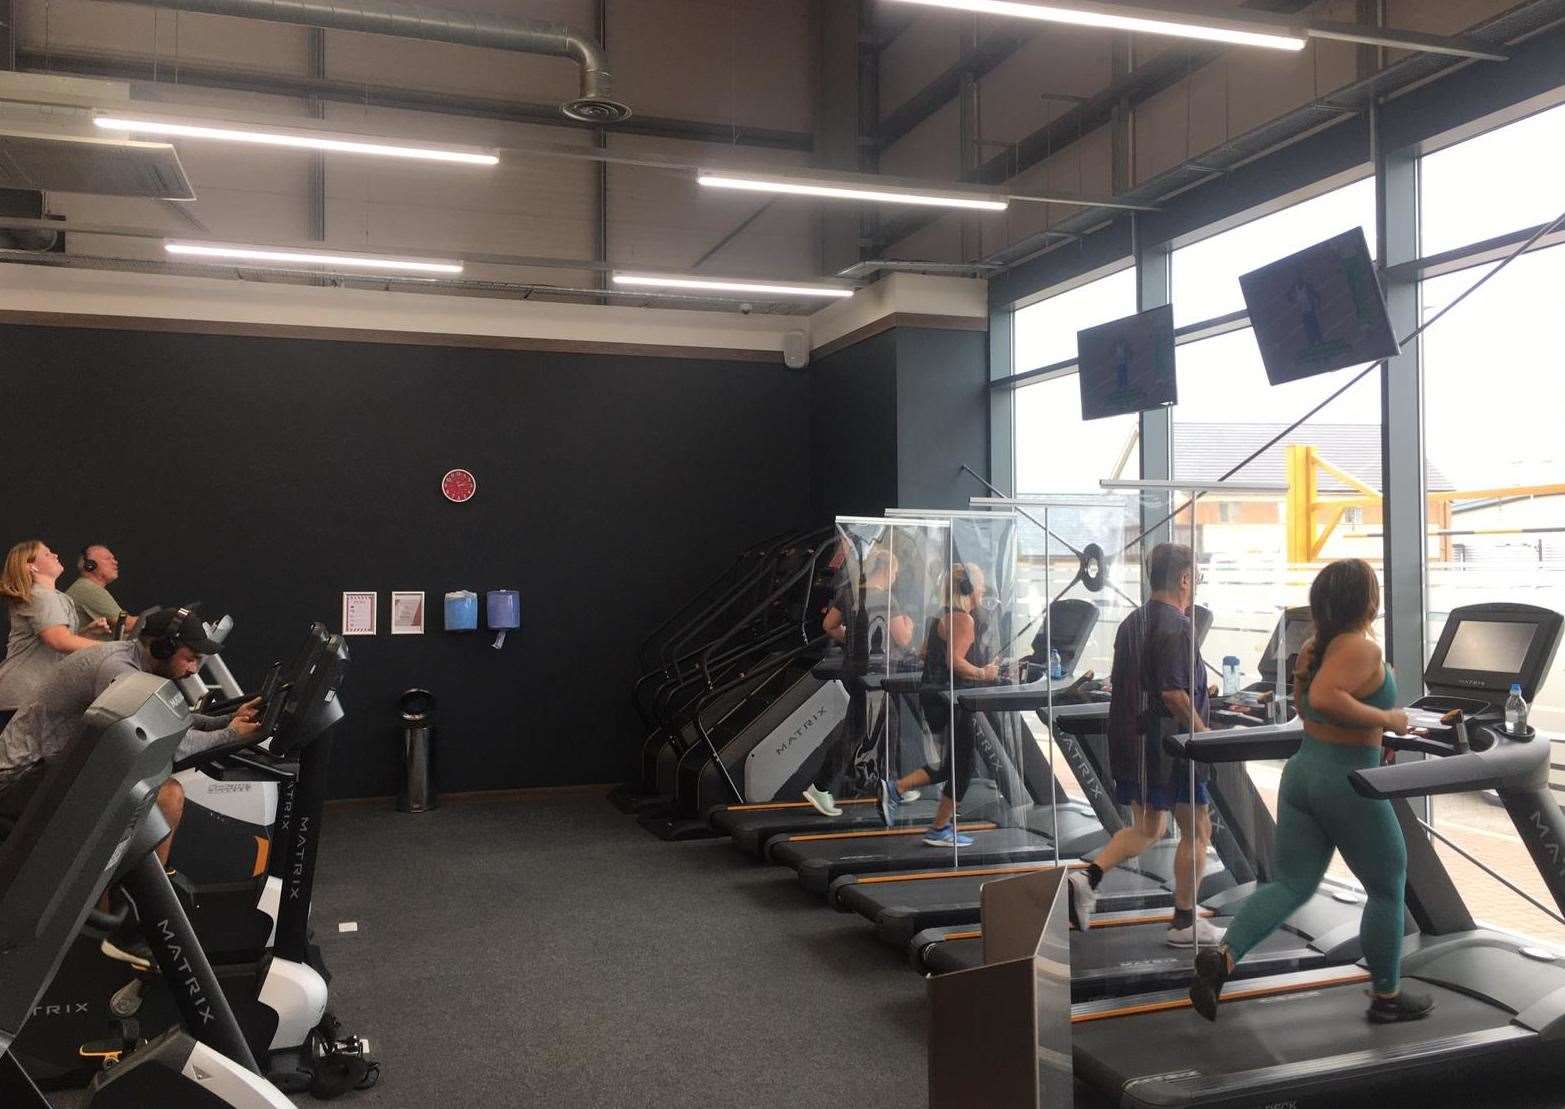 Staff at Snap Fitness on Sheppey have implemented cleaning regimes every hour. Picture: Tom Creed